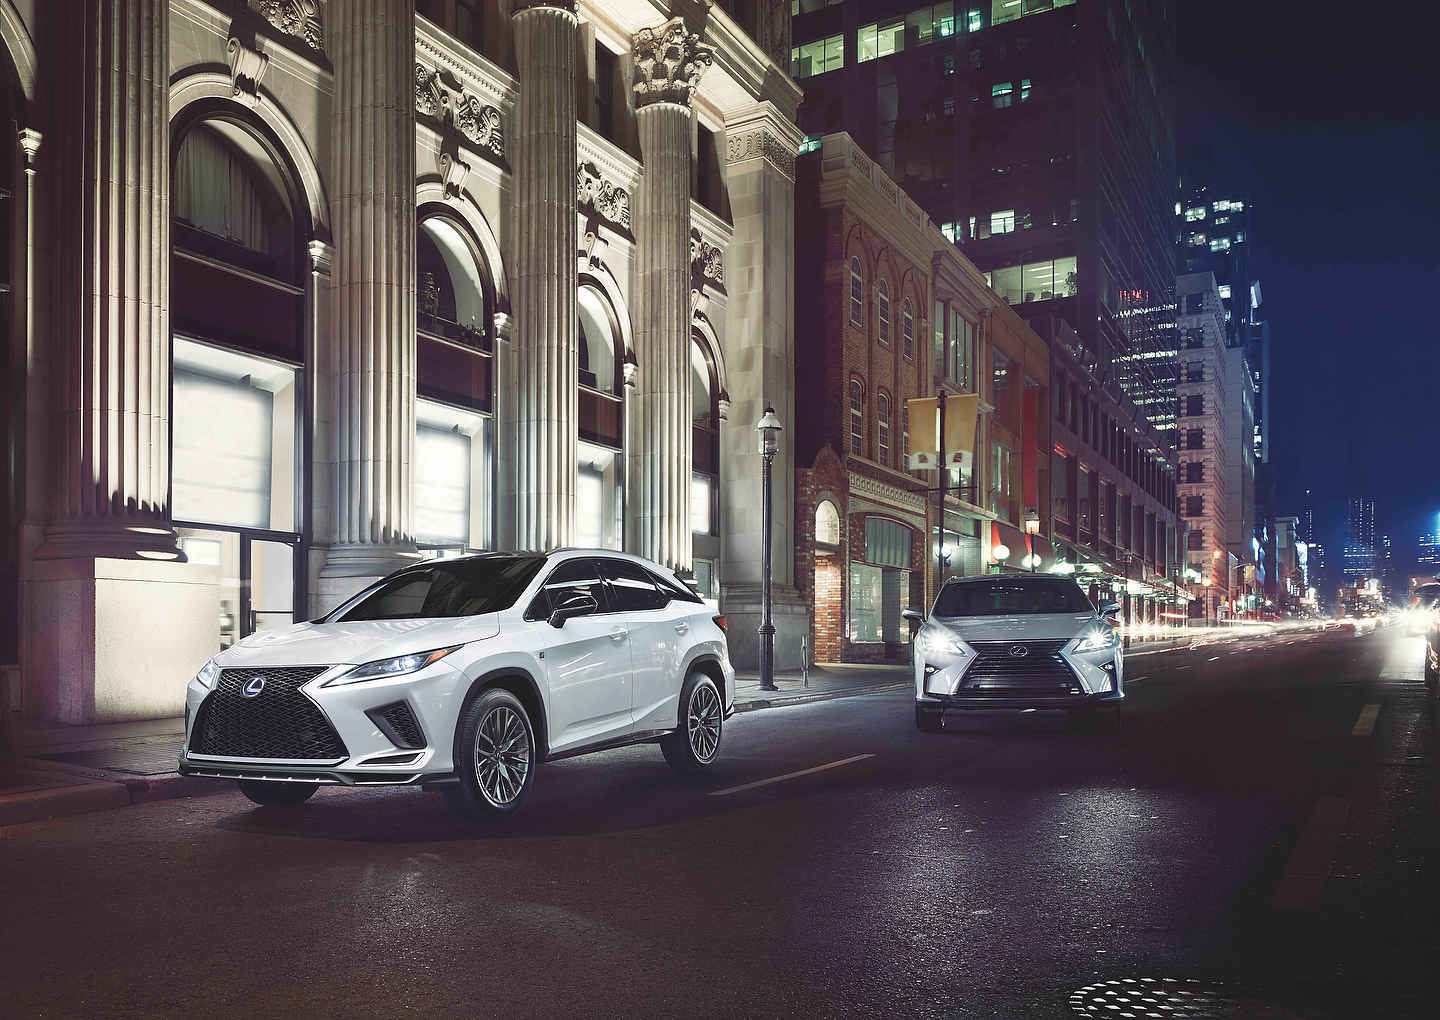 Why buy a pre-owned 2020 Lexus RX 450h?